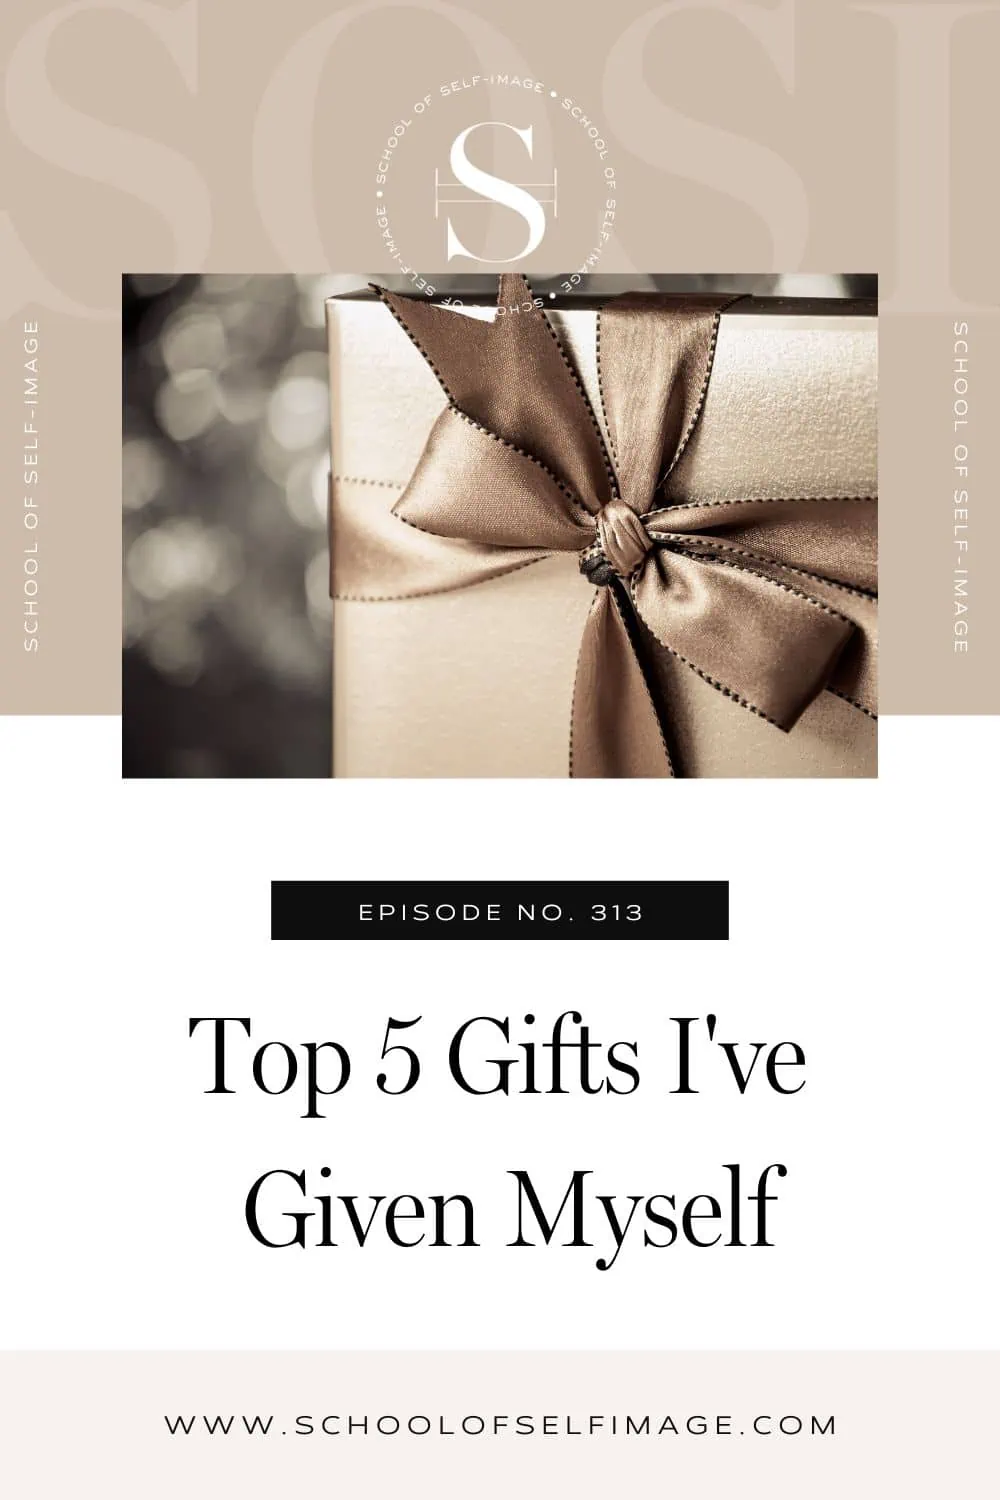 Give yourself the gift of self-affirmation